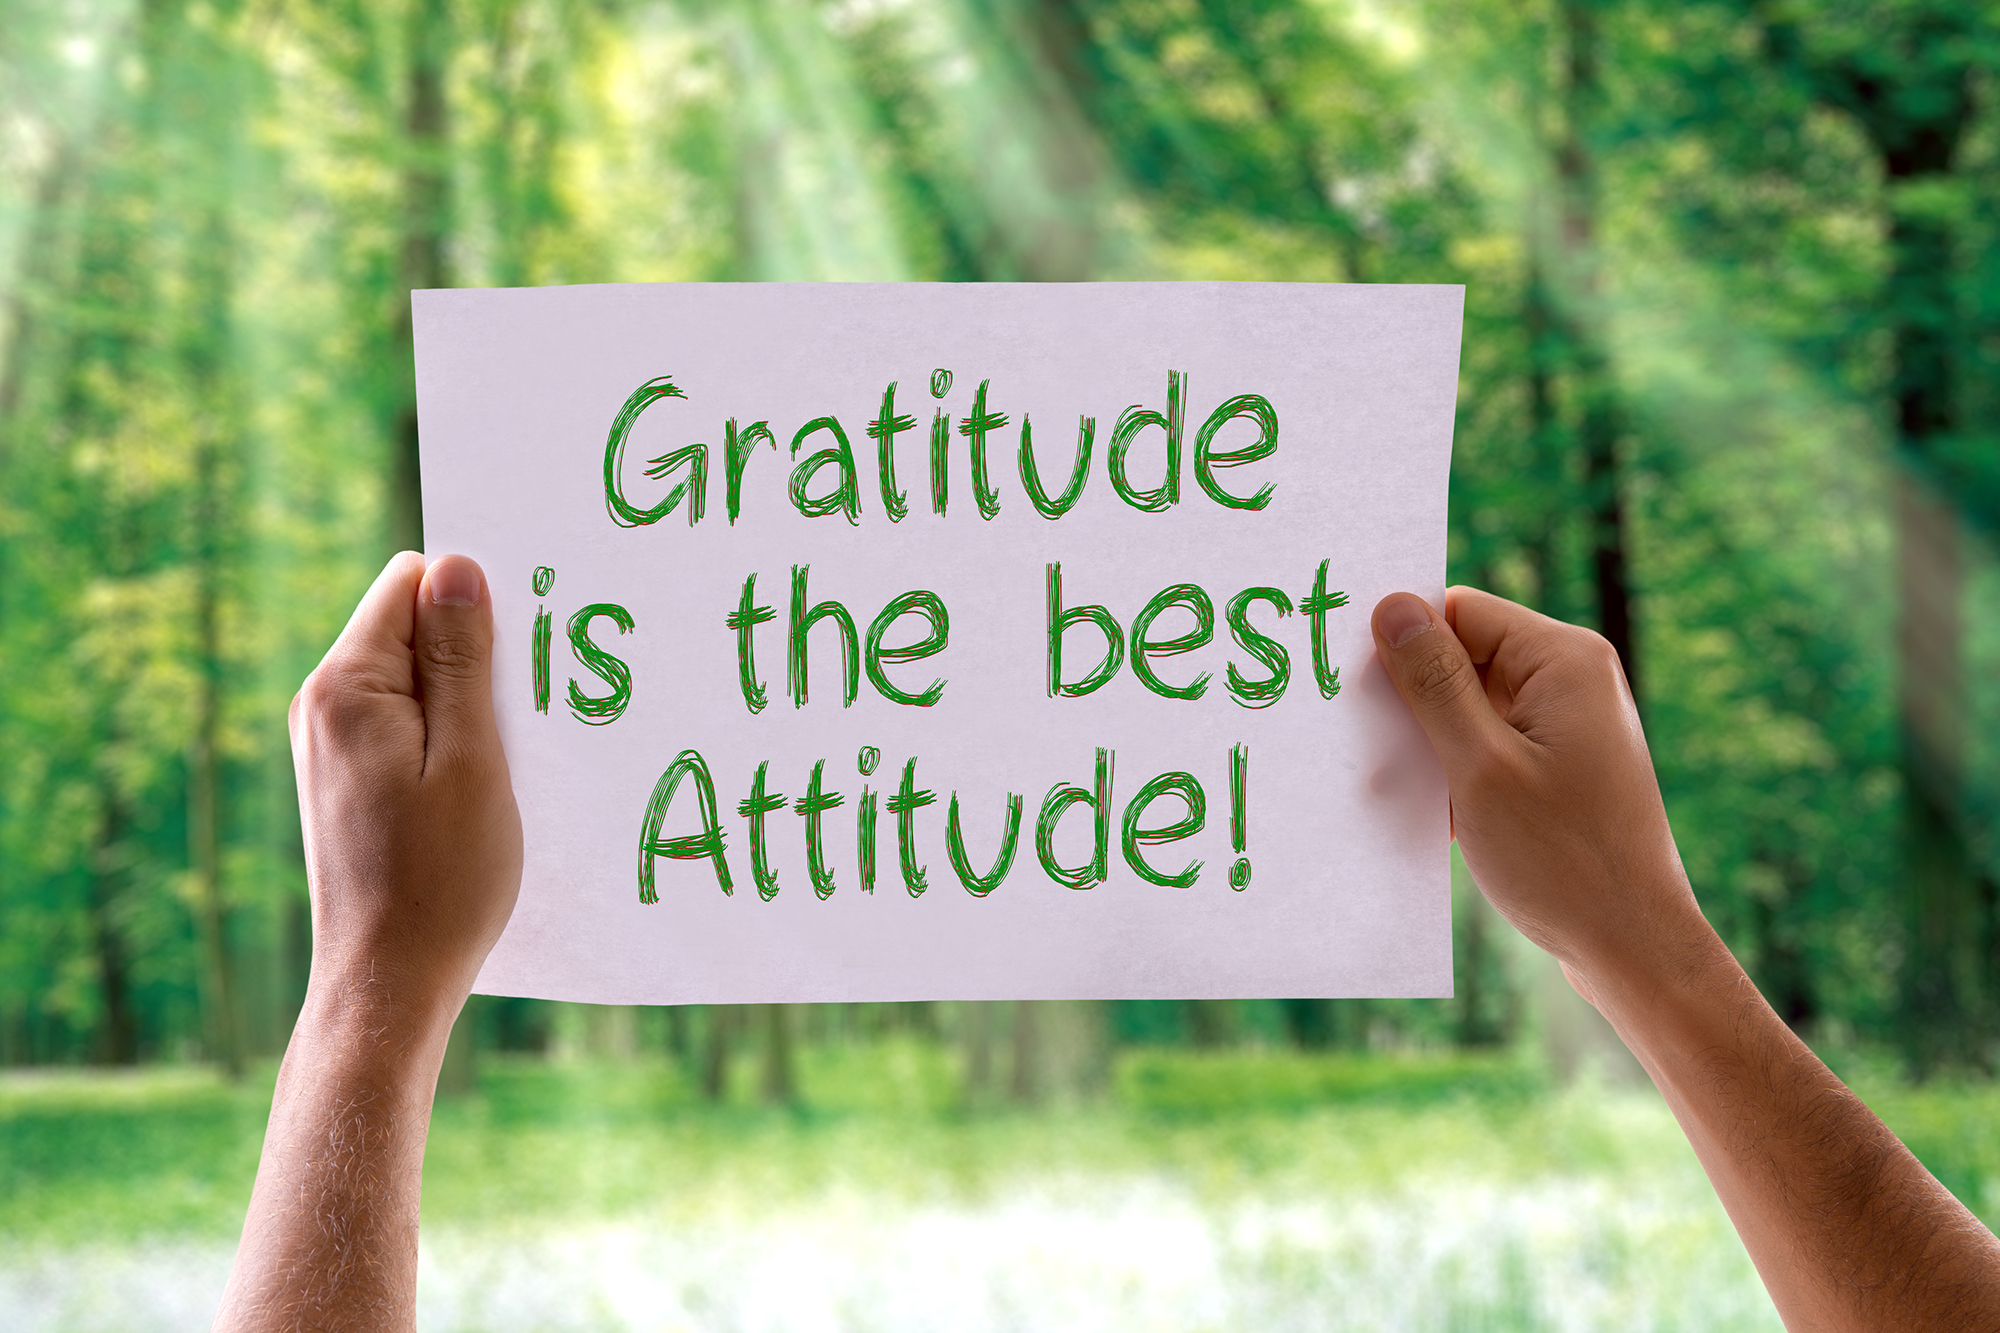 9 Essential Reasons to Cultivate an Attitude of Gratitude by Donald